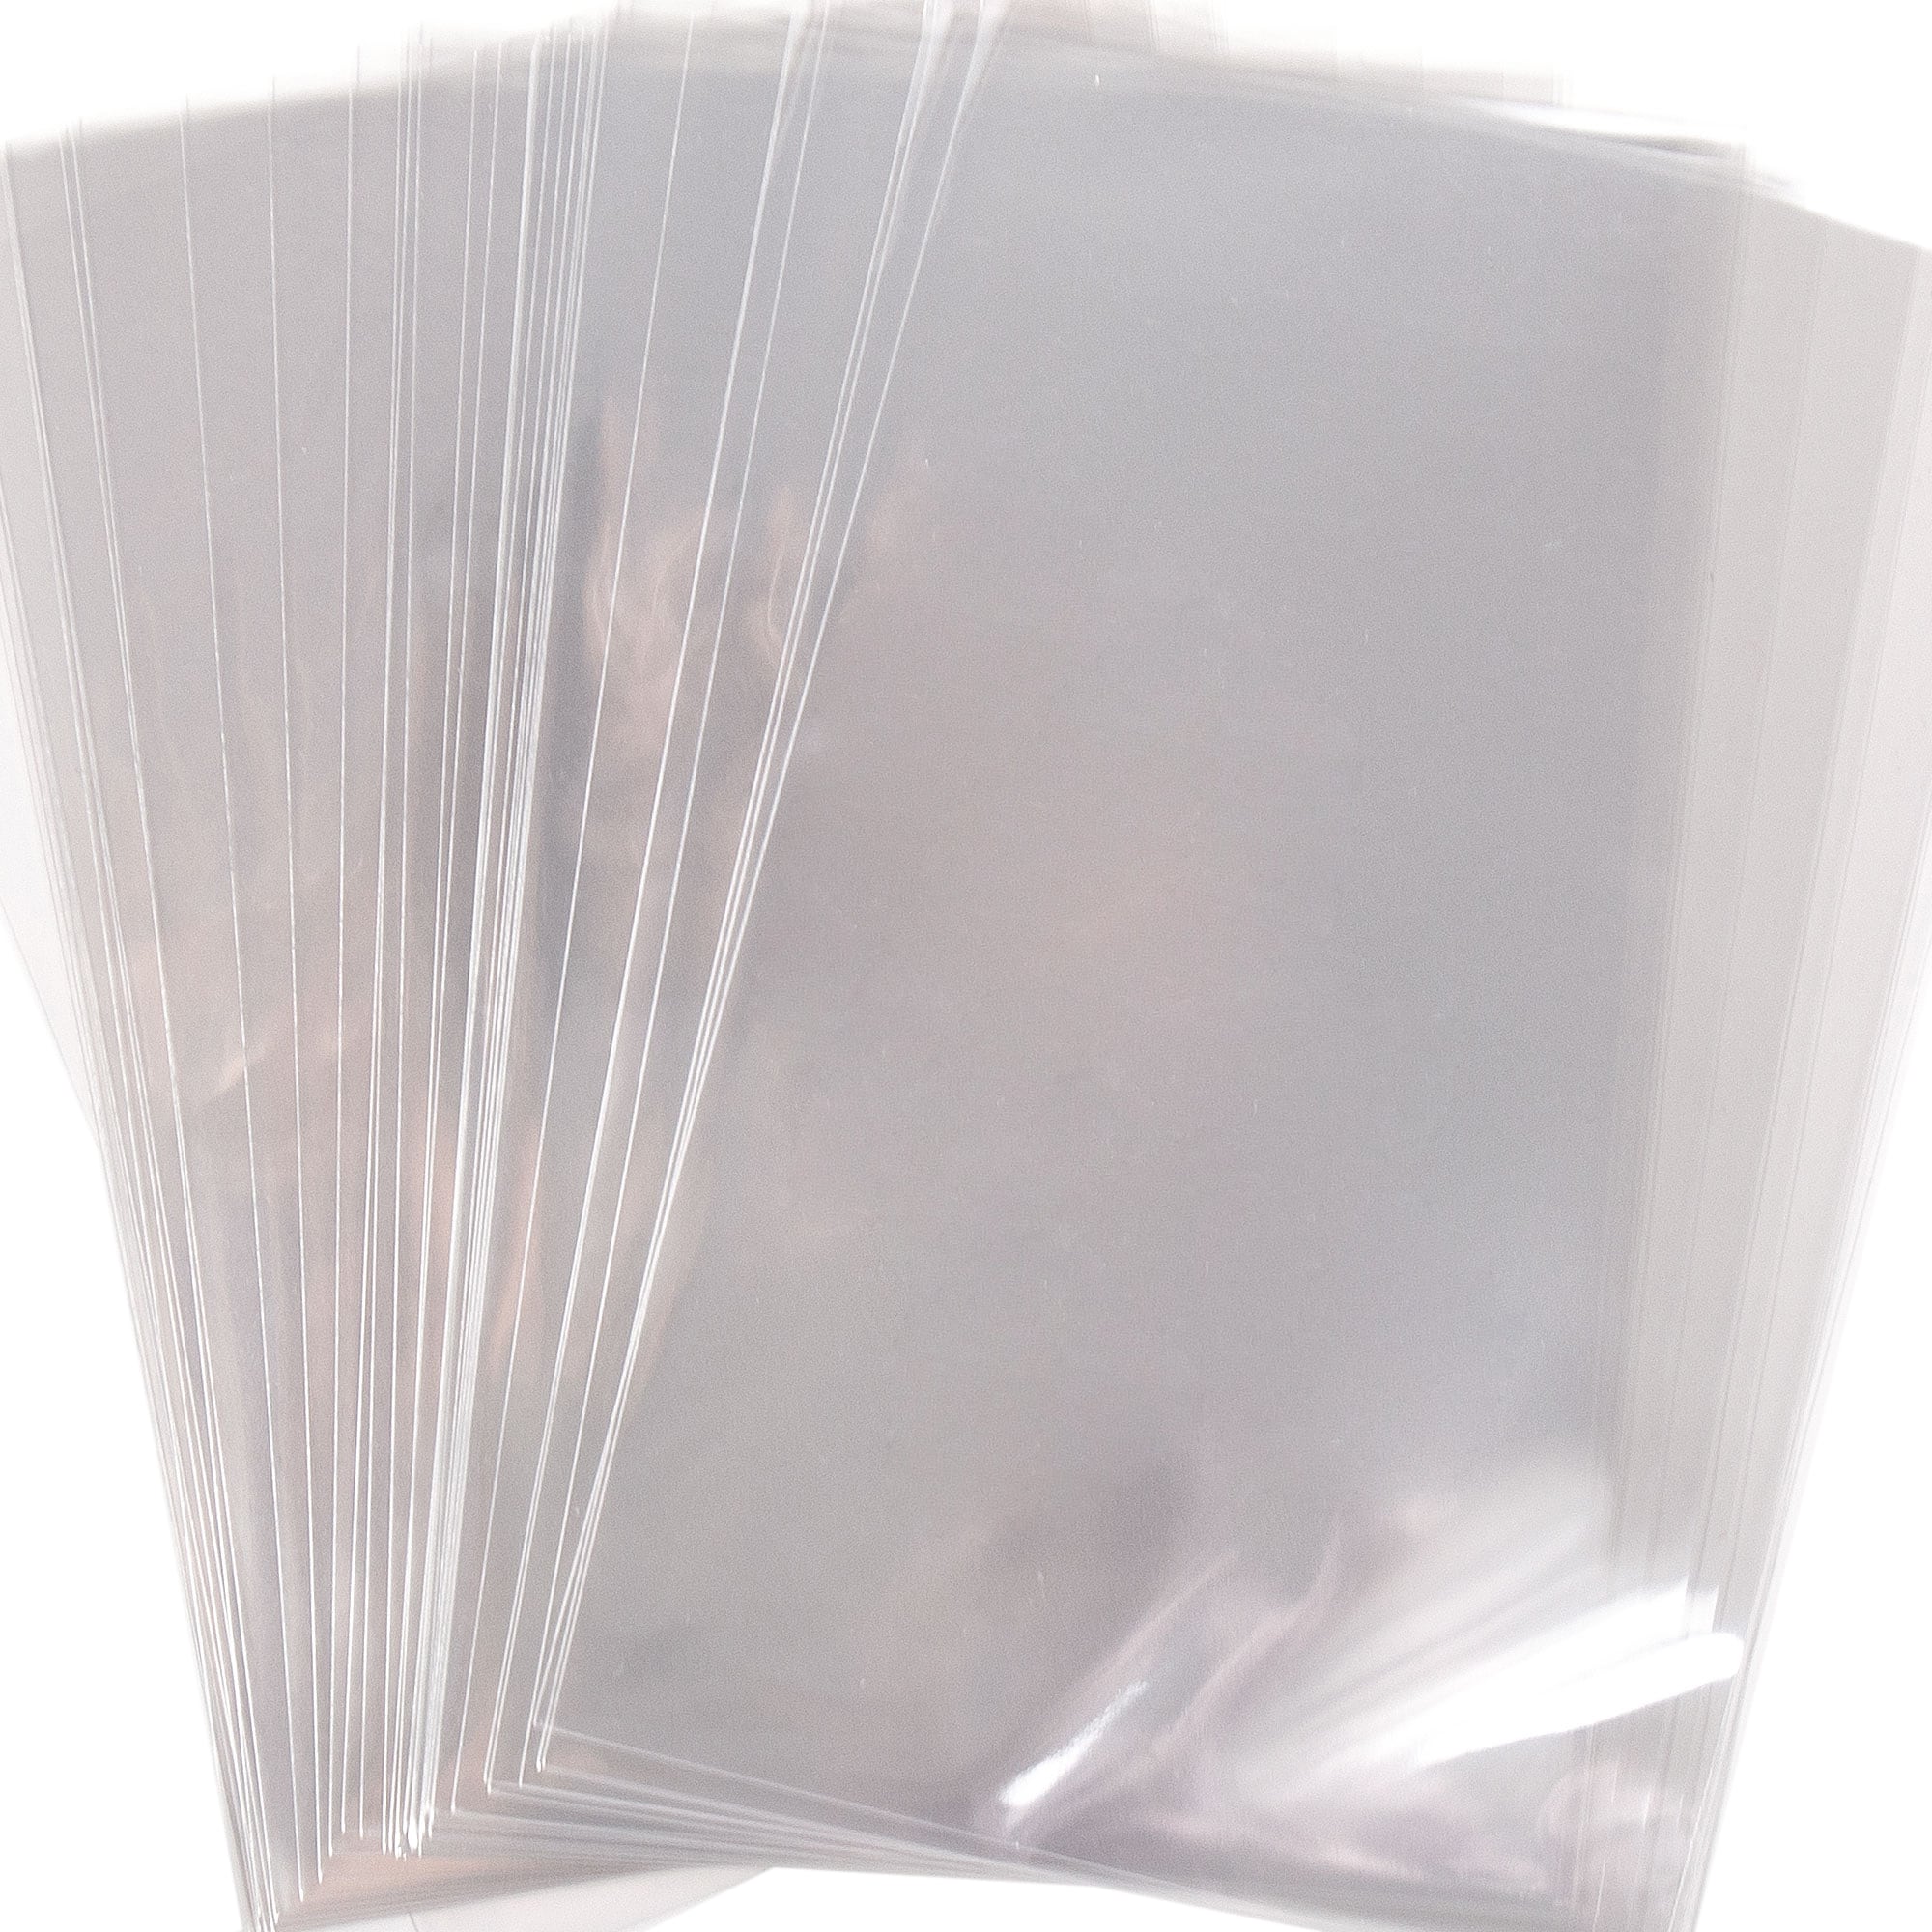 Cellophane Gift Bags by Make Market®